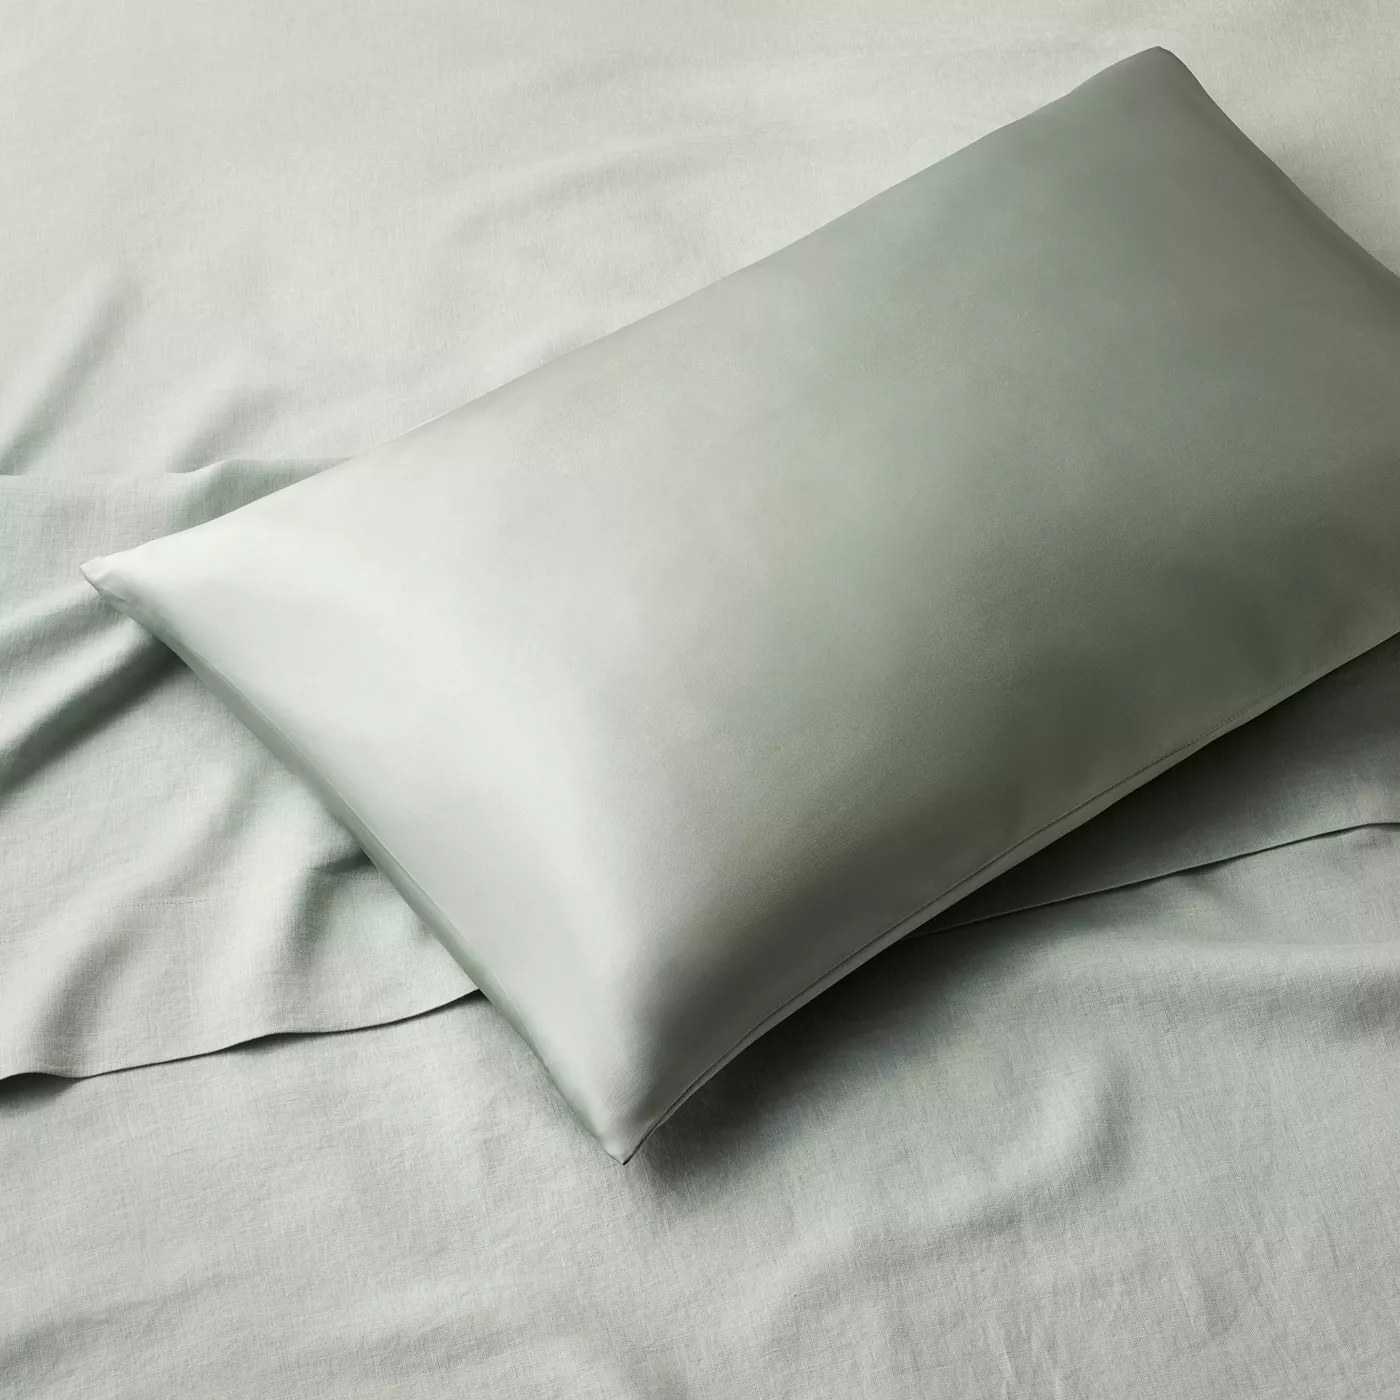 The silk pillowcase on a pillow in a bed